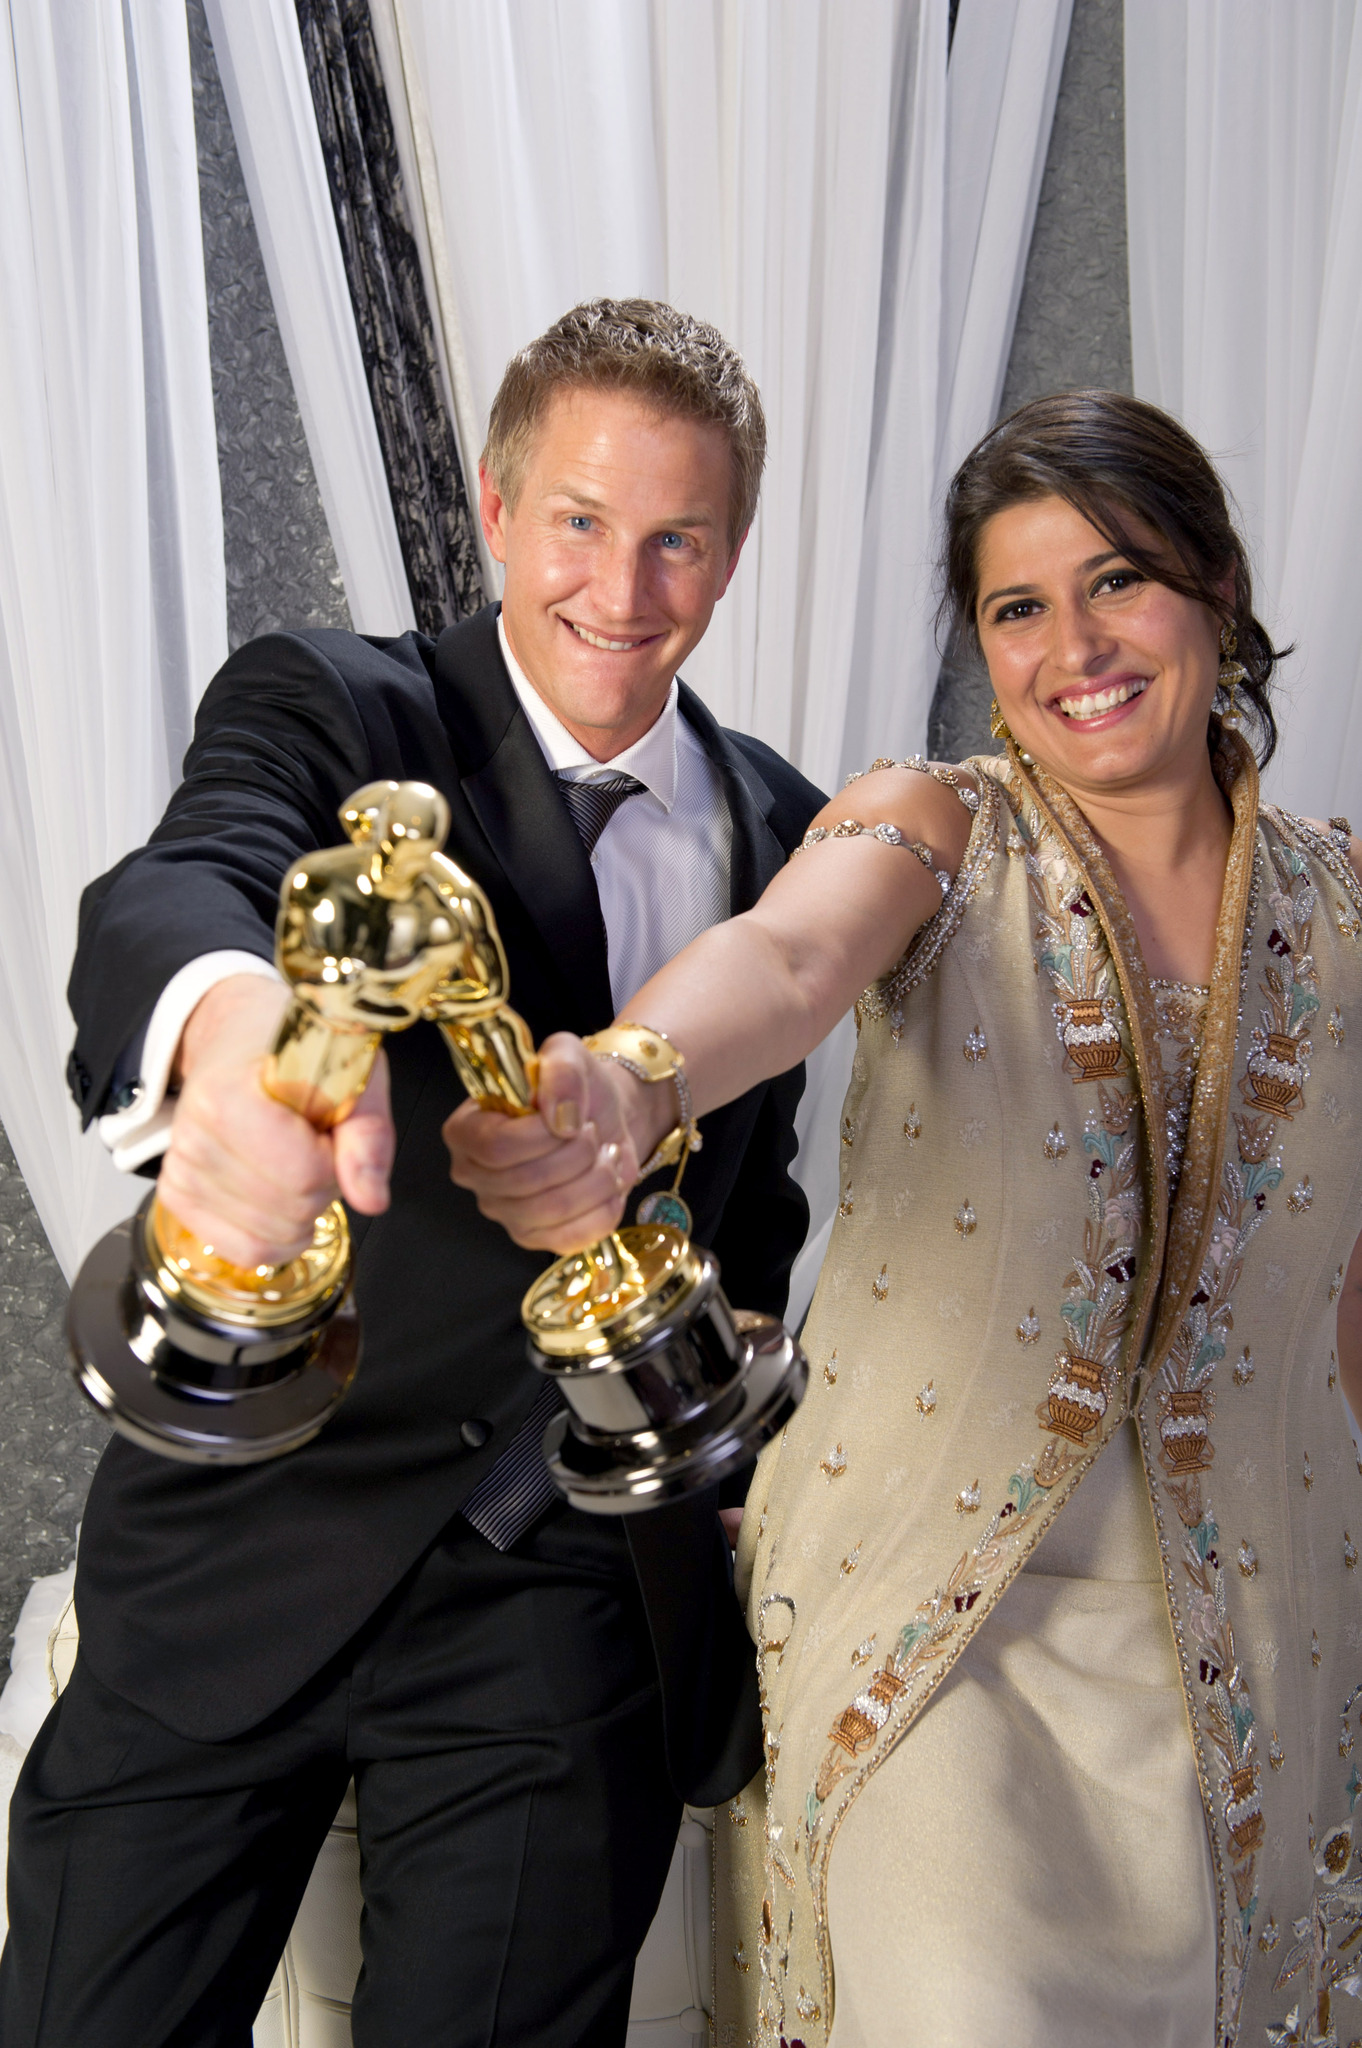 Daniel Junge and Sharmeen Obaid-Chinoy